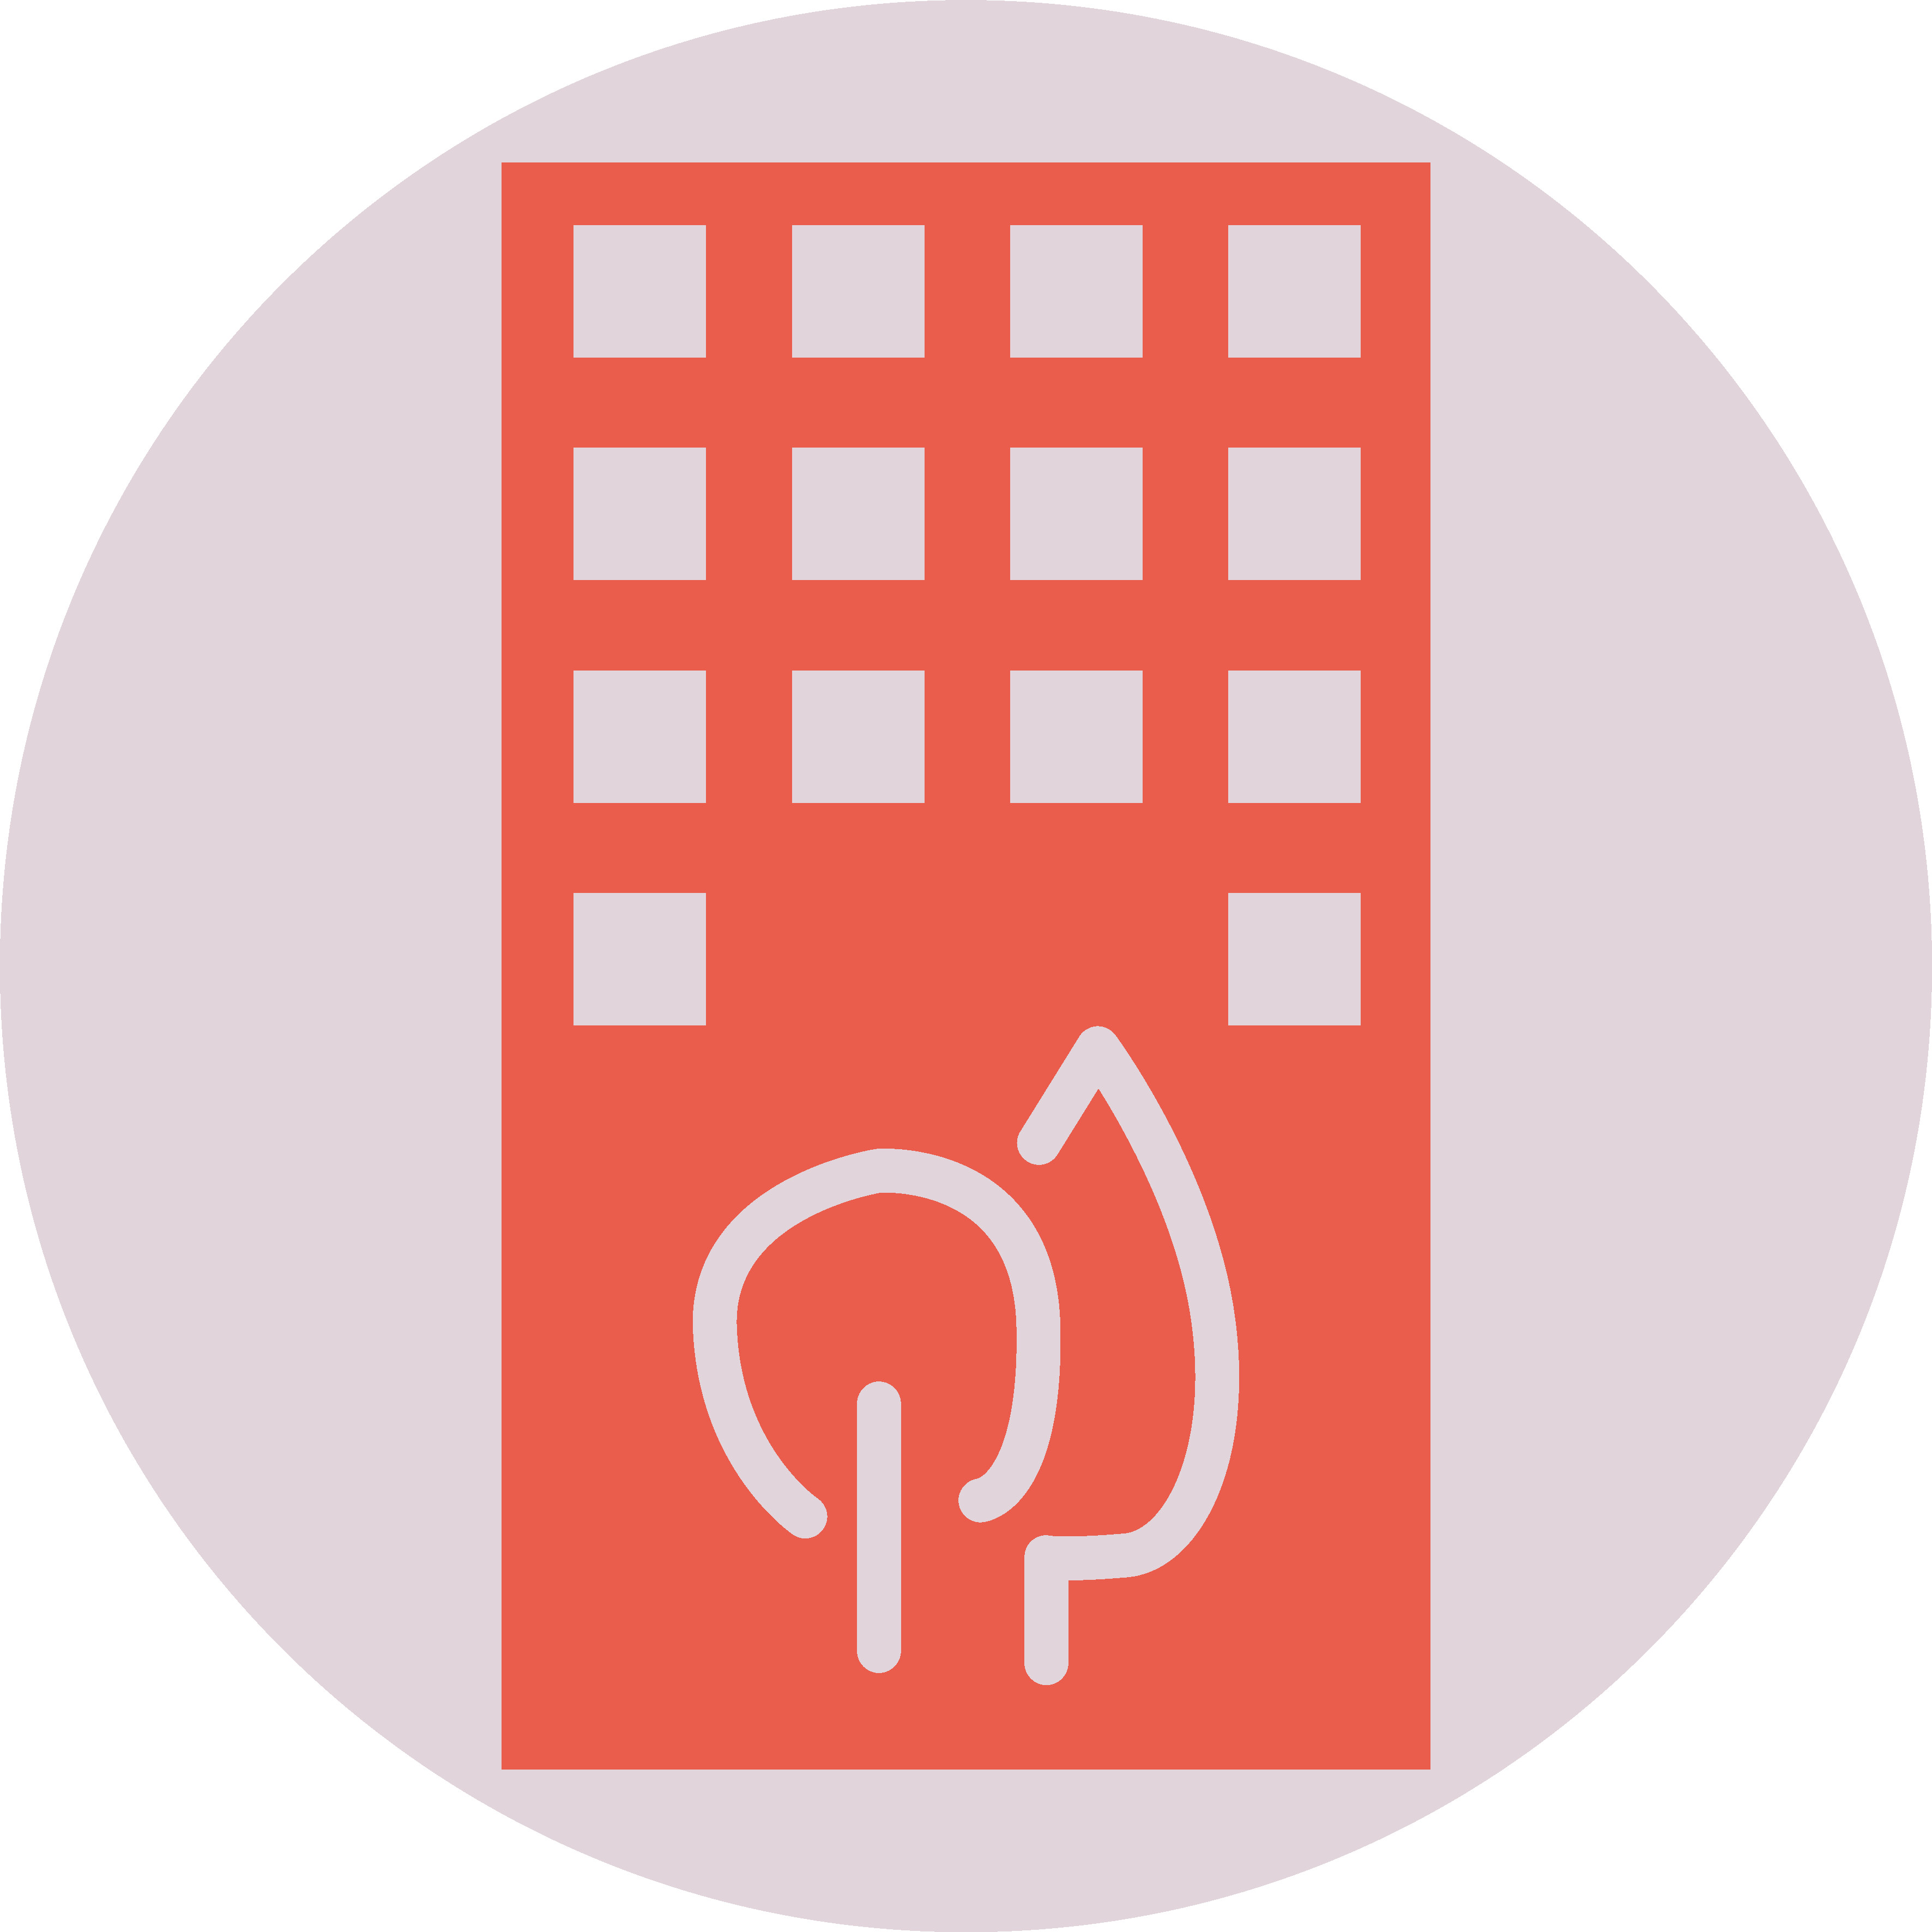 Residential buildings icon